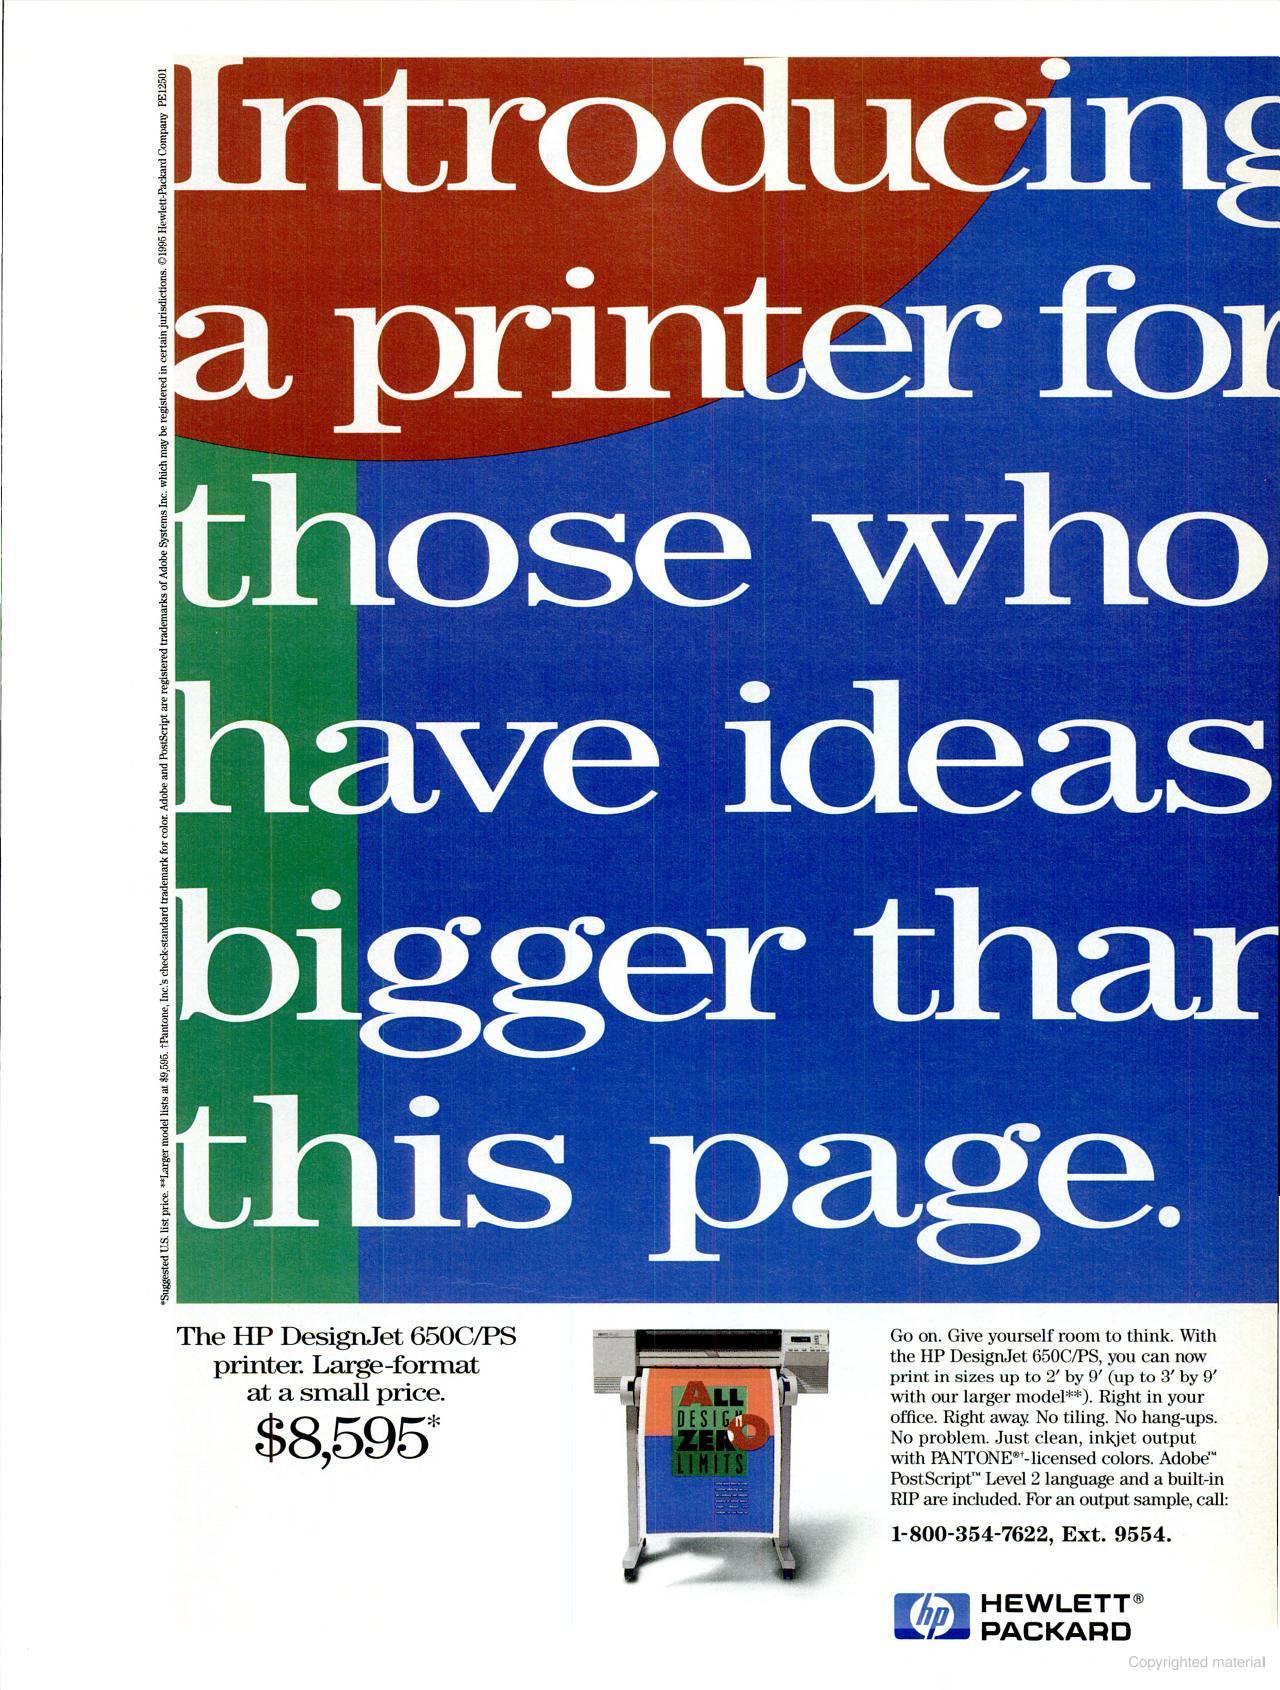 An ad for the HP DesignJet 650C